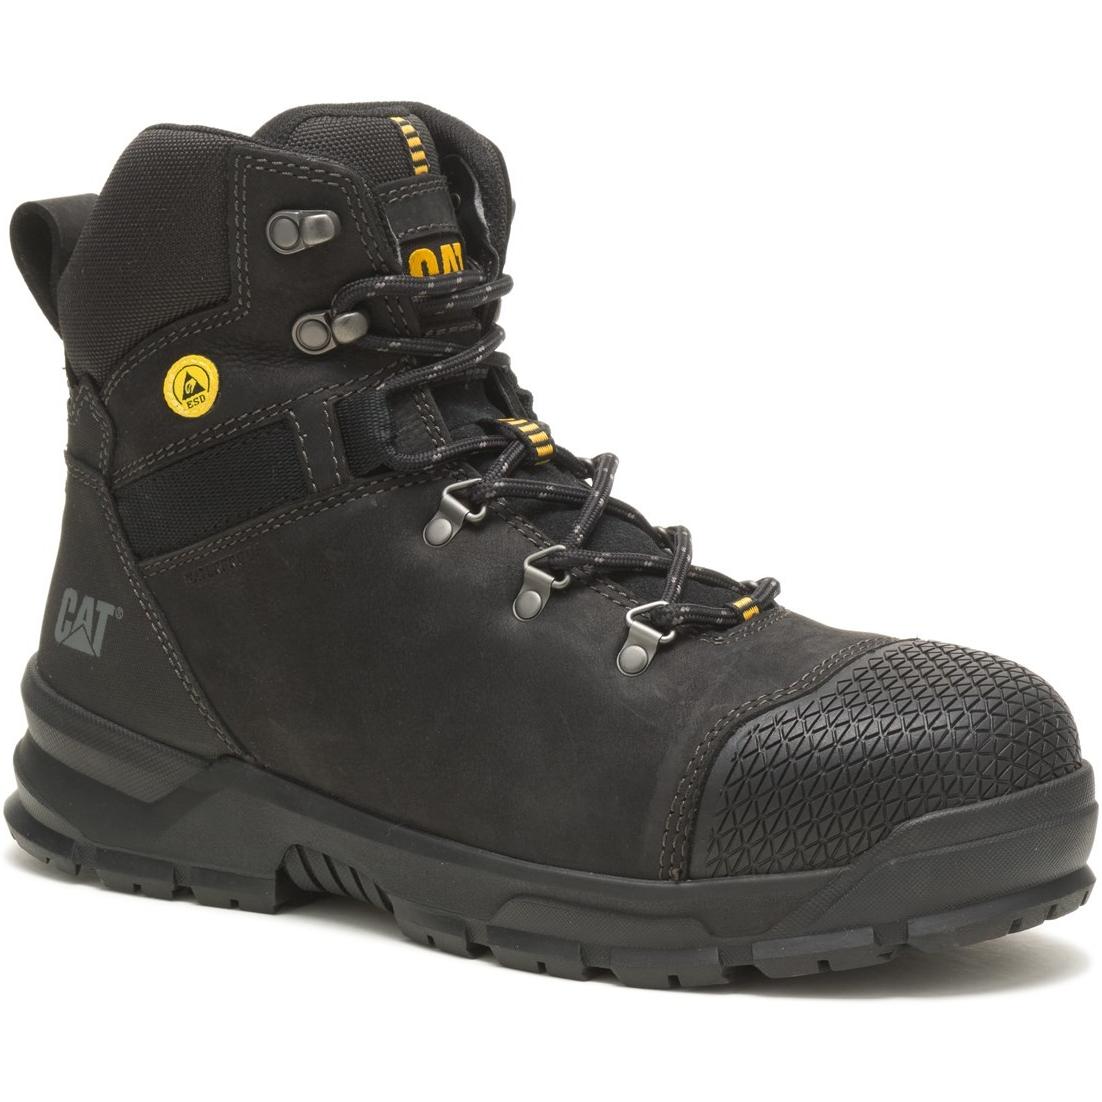 Cat Footwear Accomplice Safety Boot